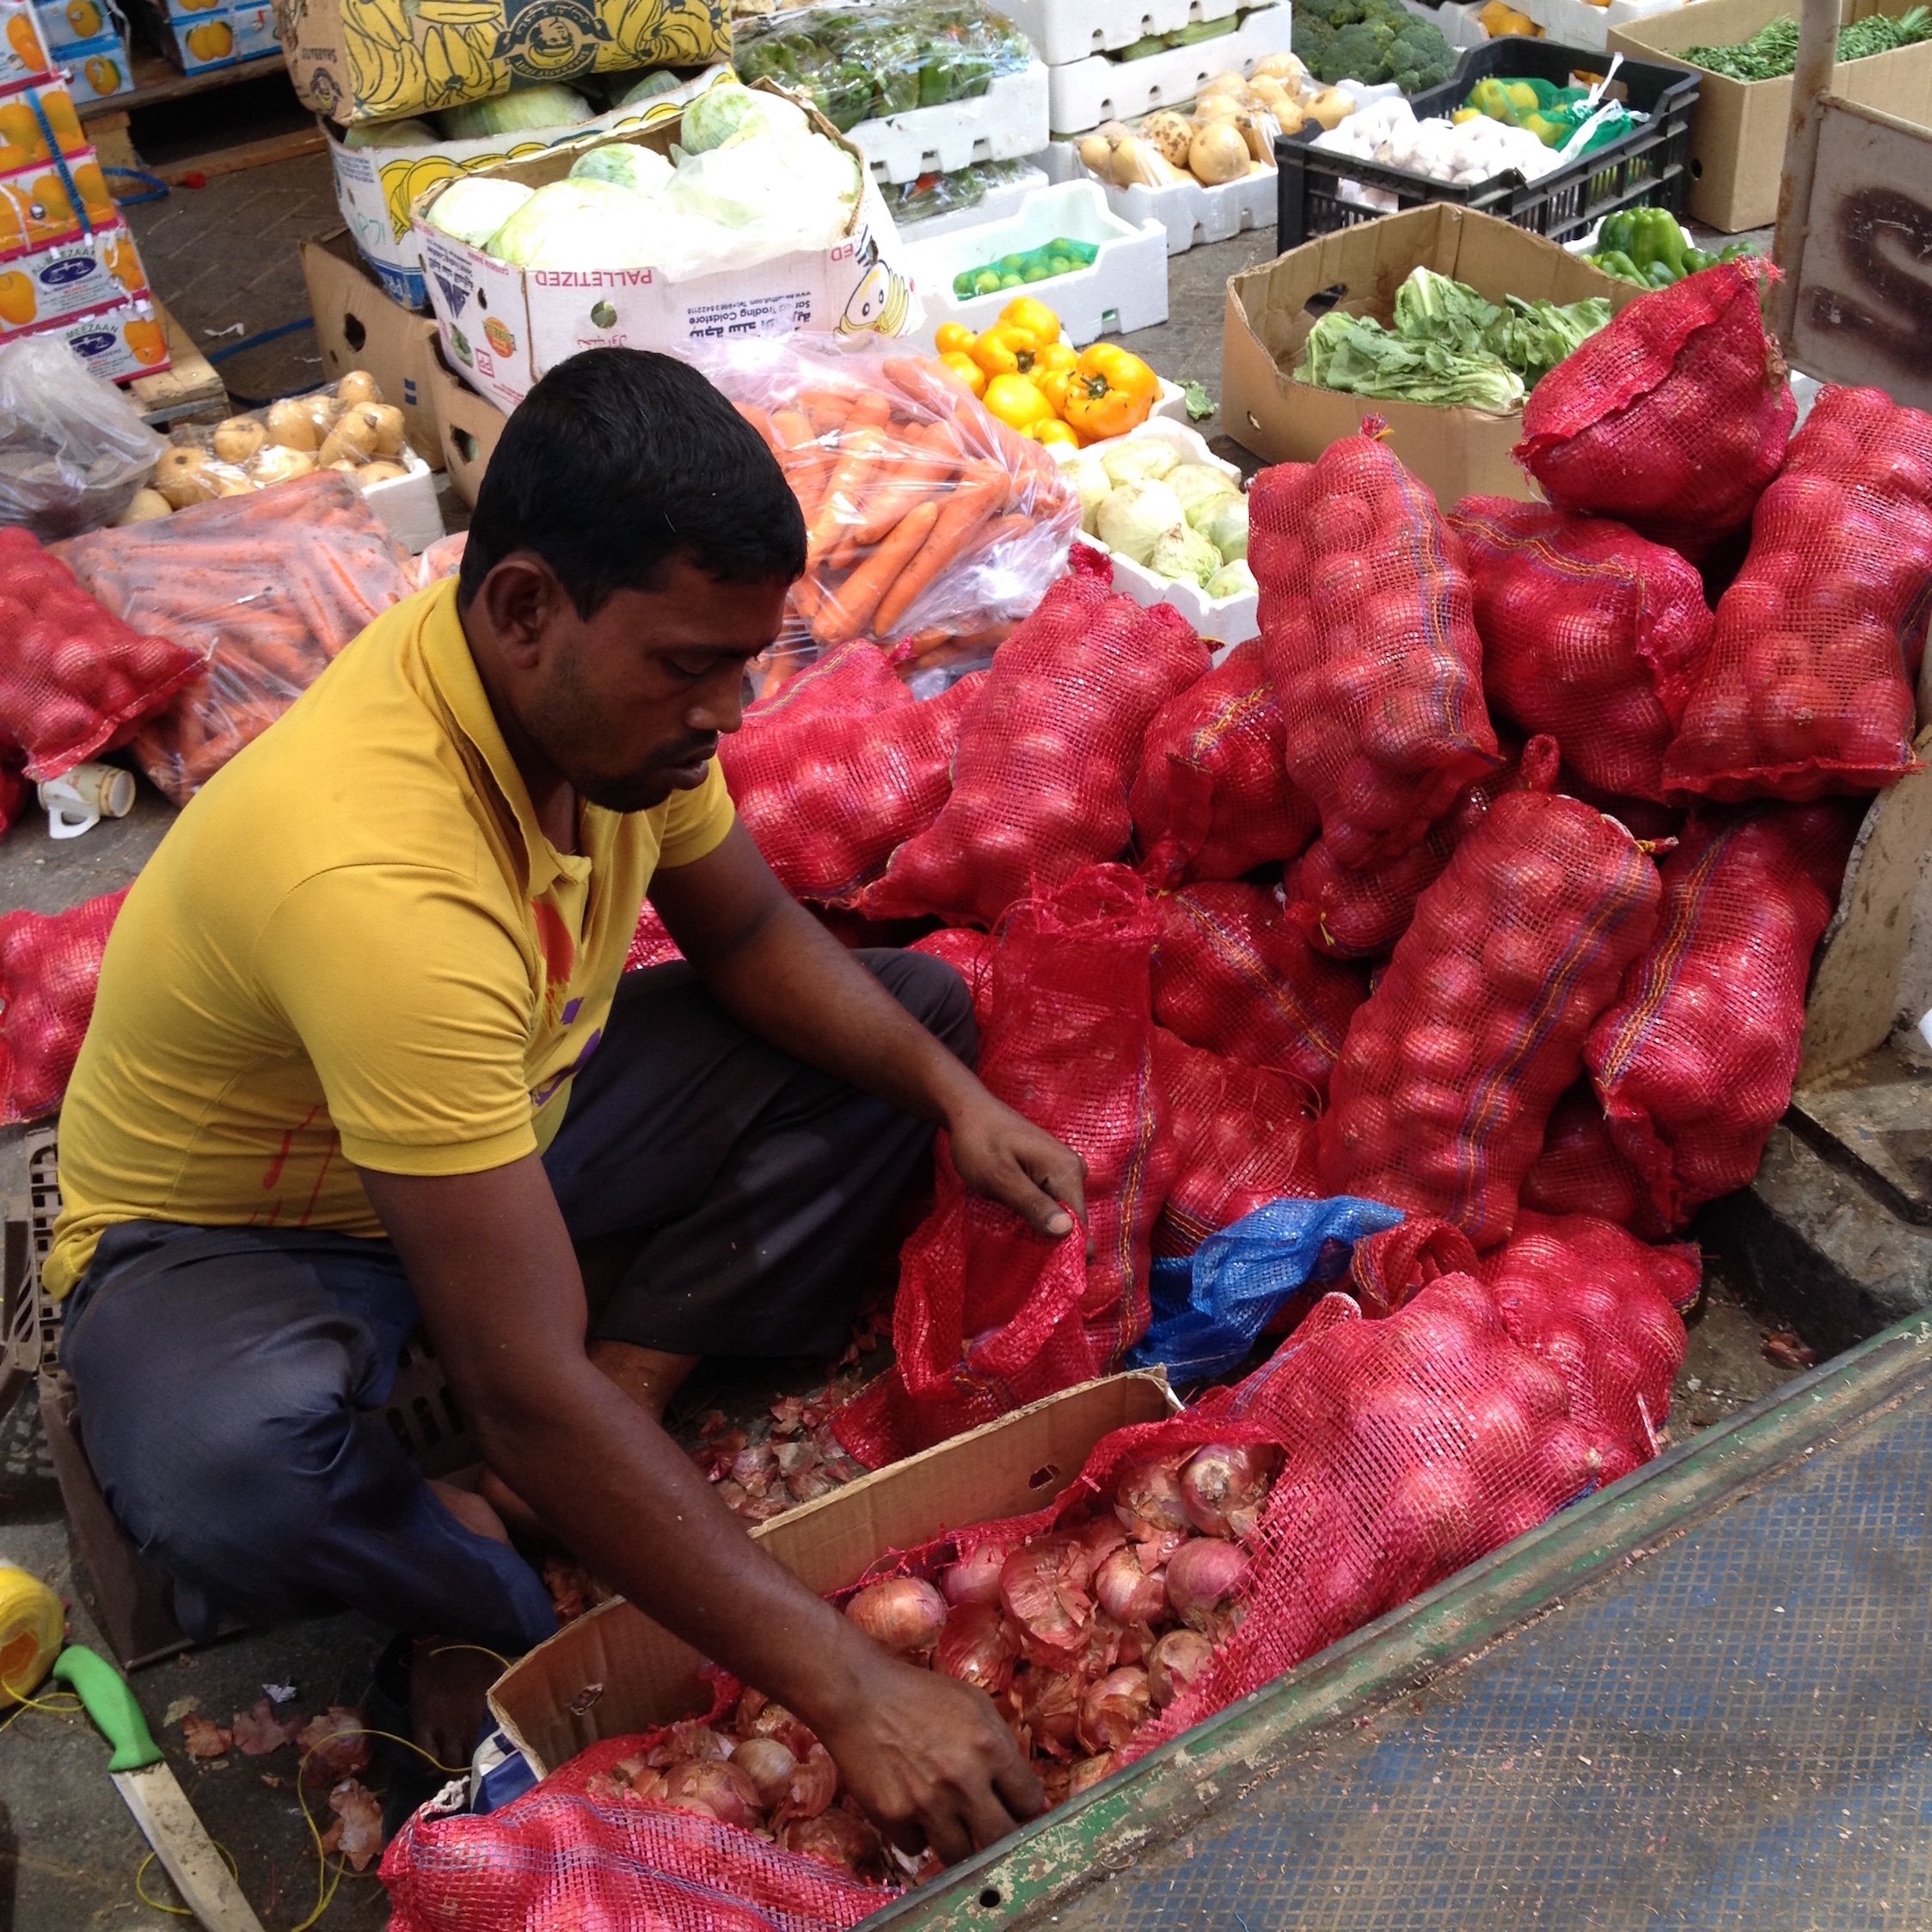 This vendor is cleaning sacks of onions to have them ready for sale. 